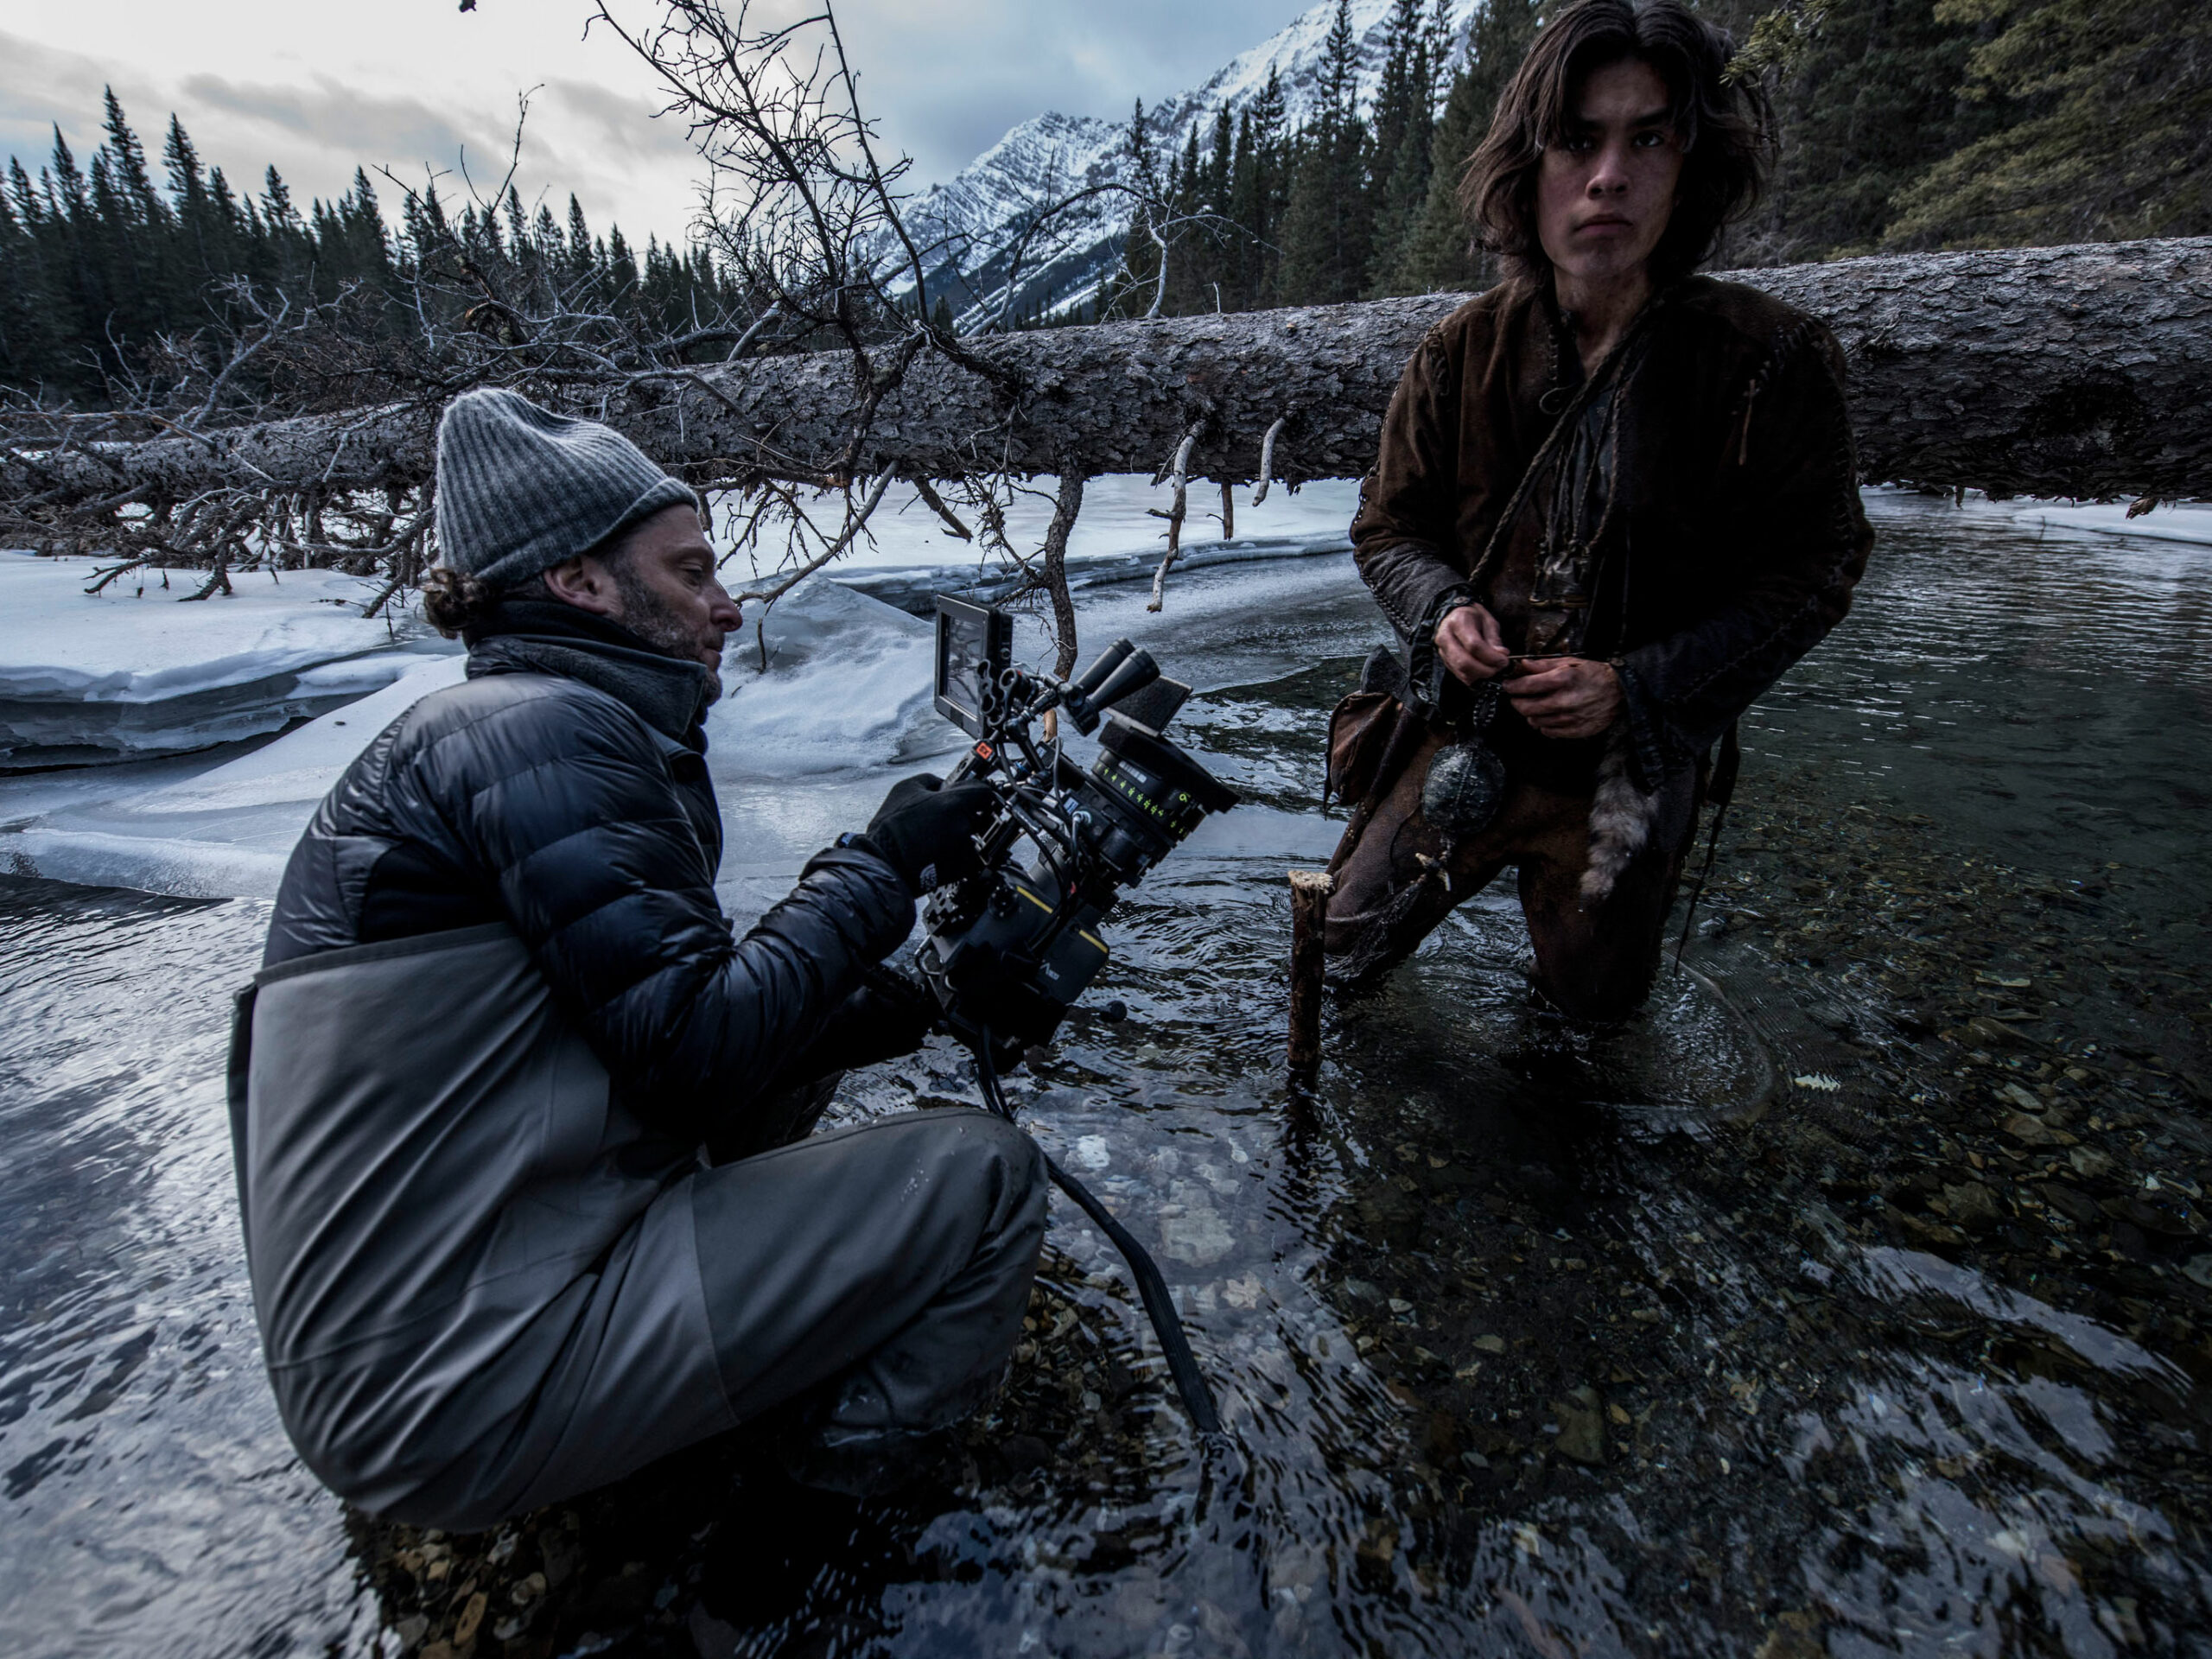 We Talked To The Man Who Shot Leonardo DiCaprio (And A Bear)